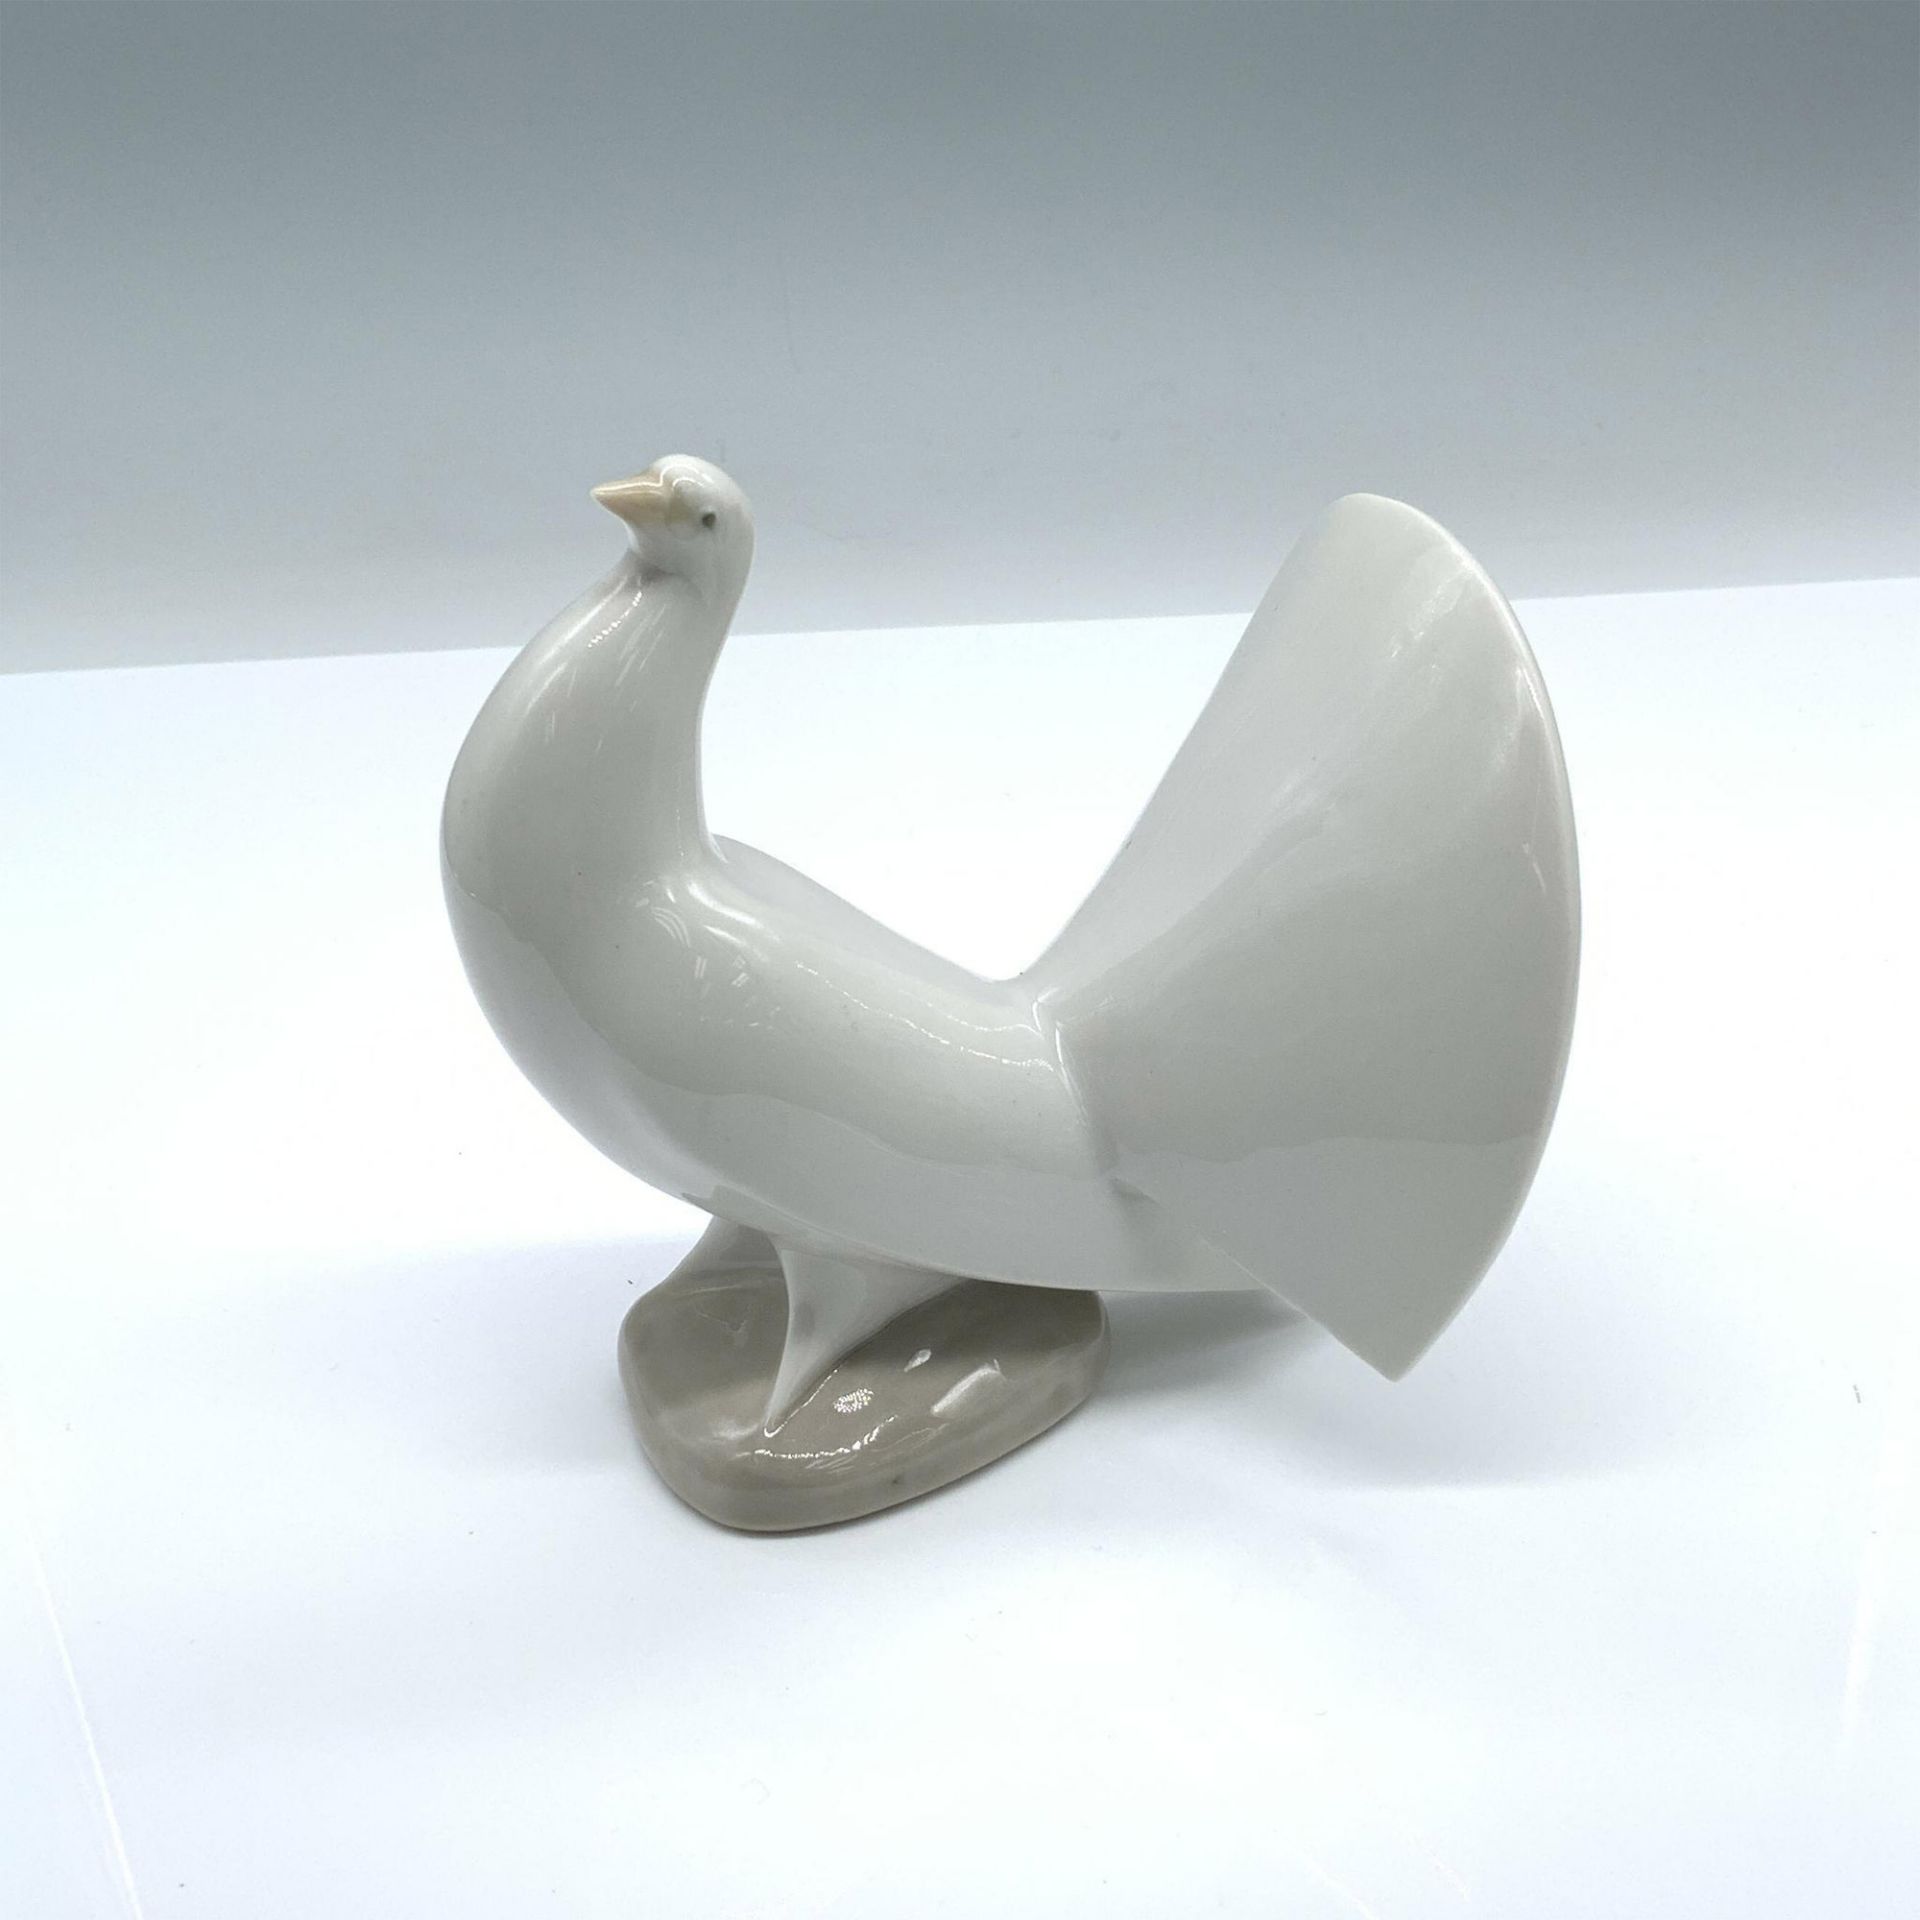 Nao by Lladro Porcelain Figurine, Dove Bird - Image 2 of 6